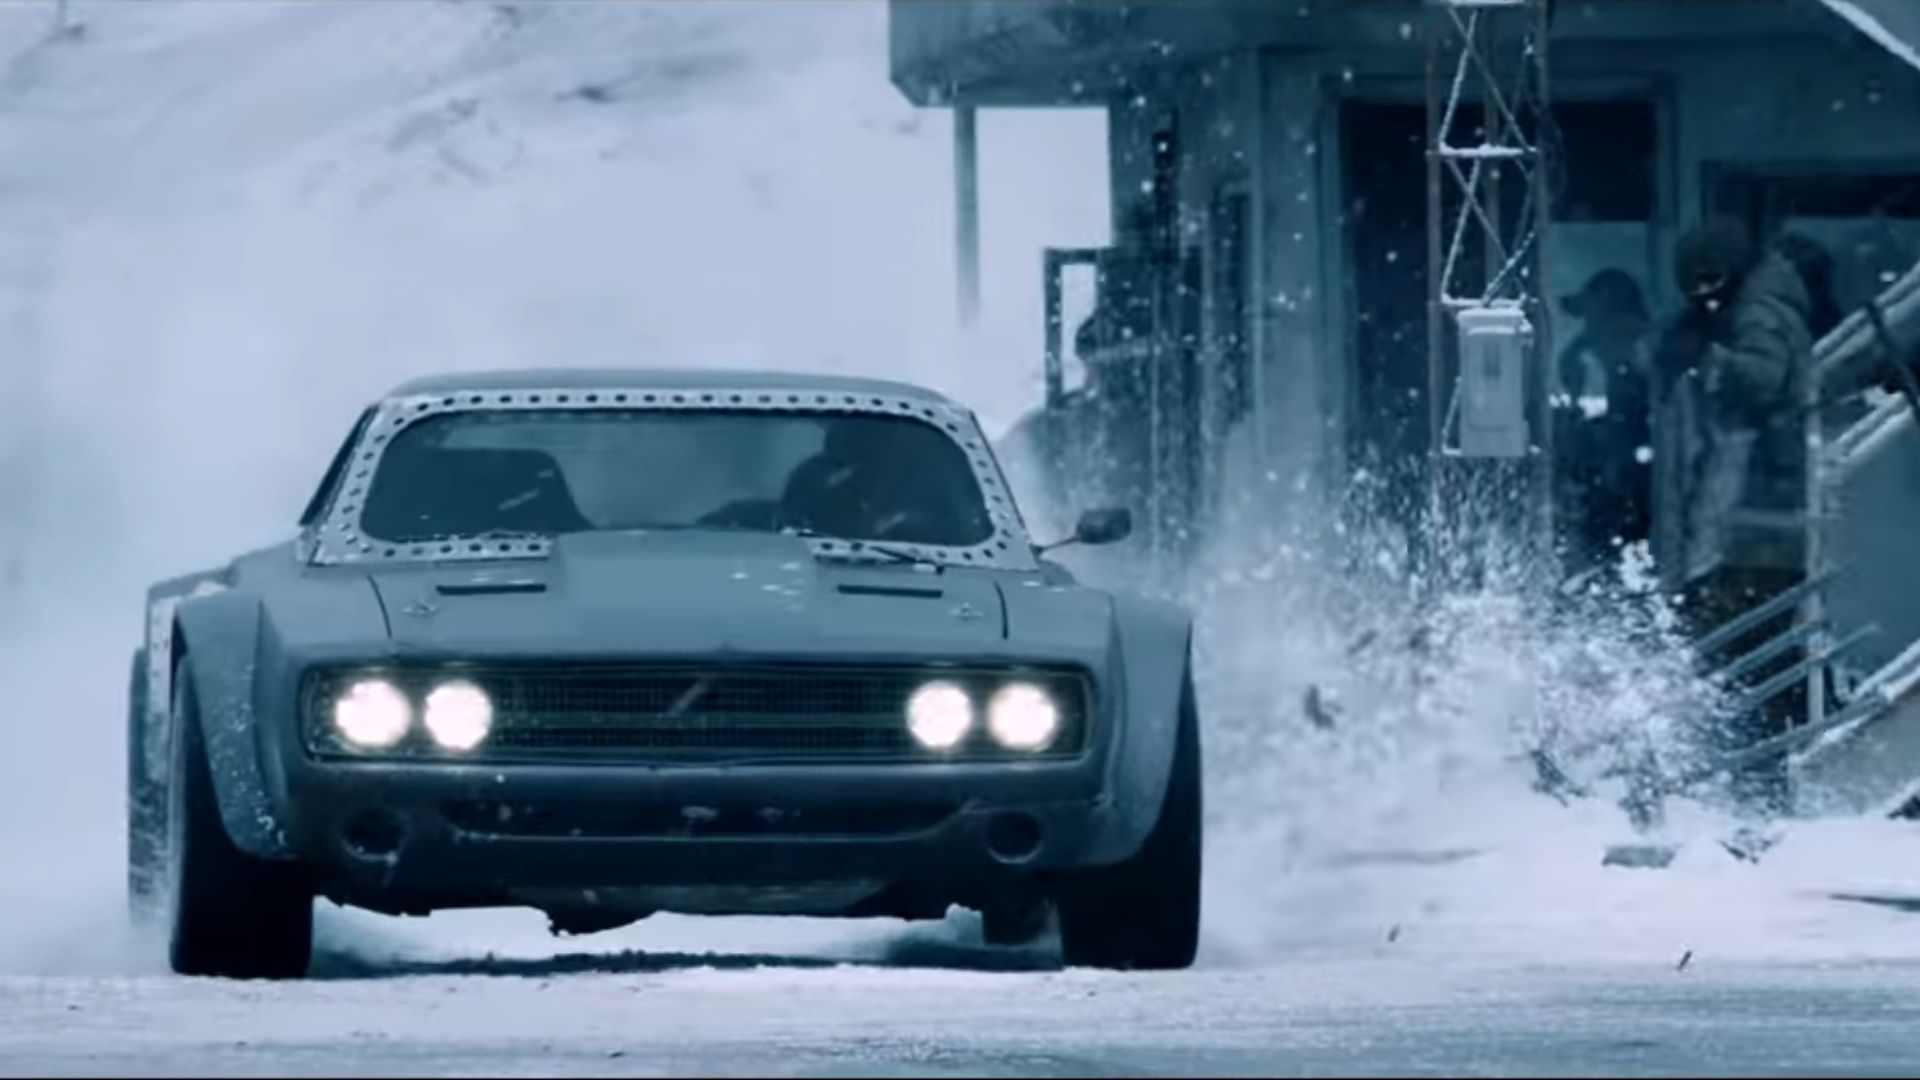 Where Is The Fate Of The Furious Ice Charger?